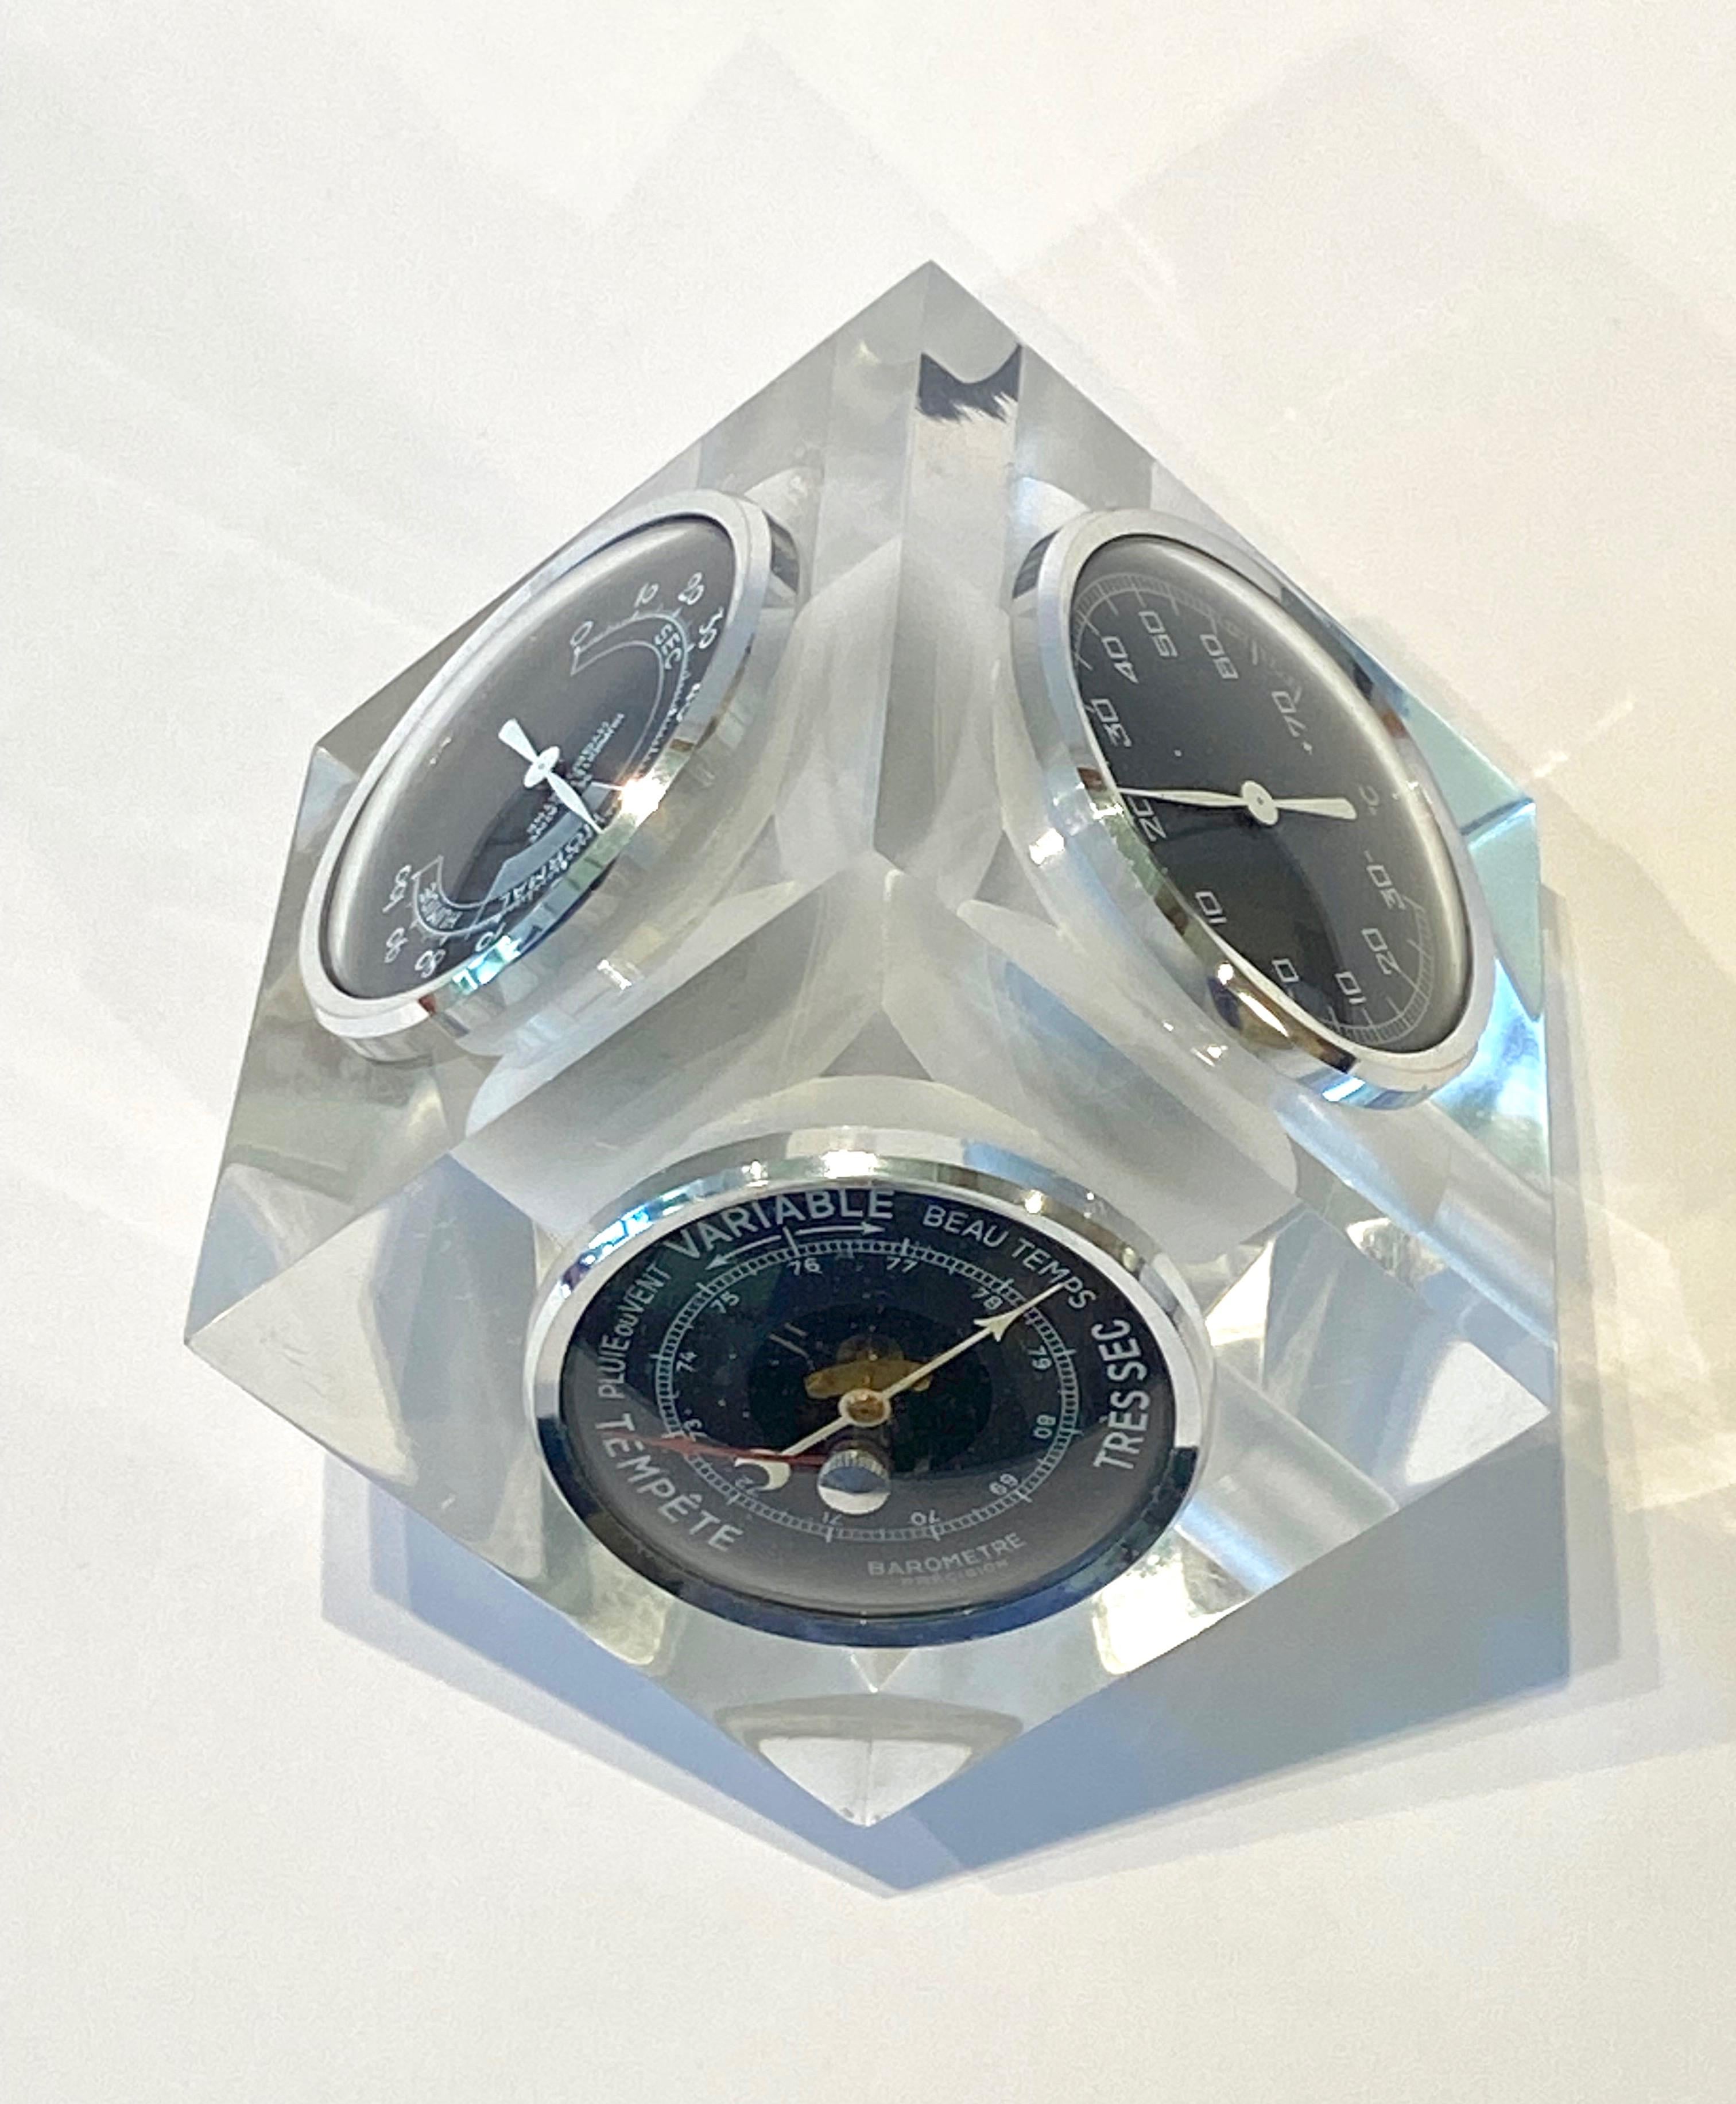 1970s French lucite cube desk top weather station, the faceted cube is three sided with three instruments with one corner of the cube cut to create an angle to make it face upwards. The three instruments are a barometre (barometric pressure gauge),